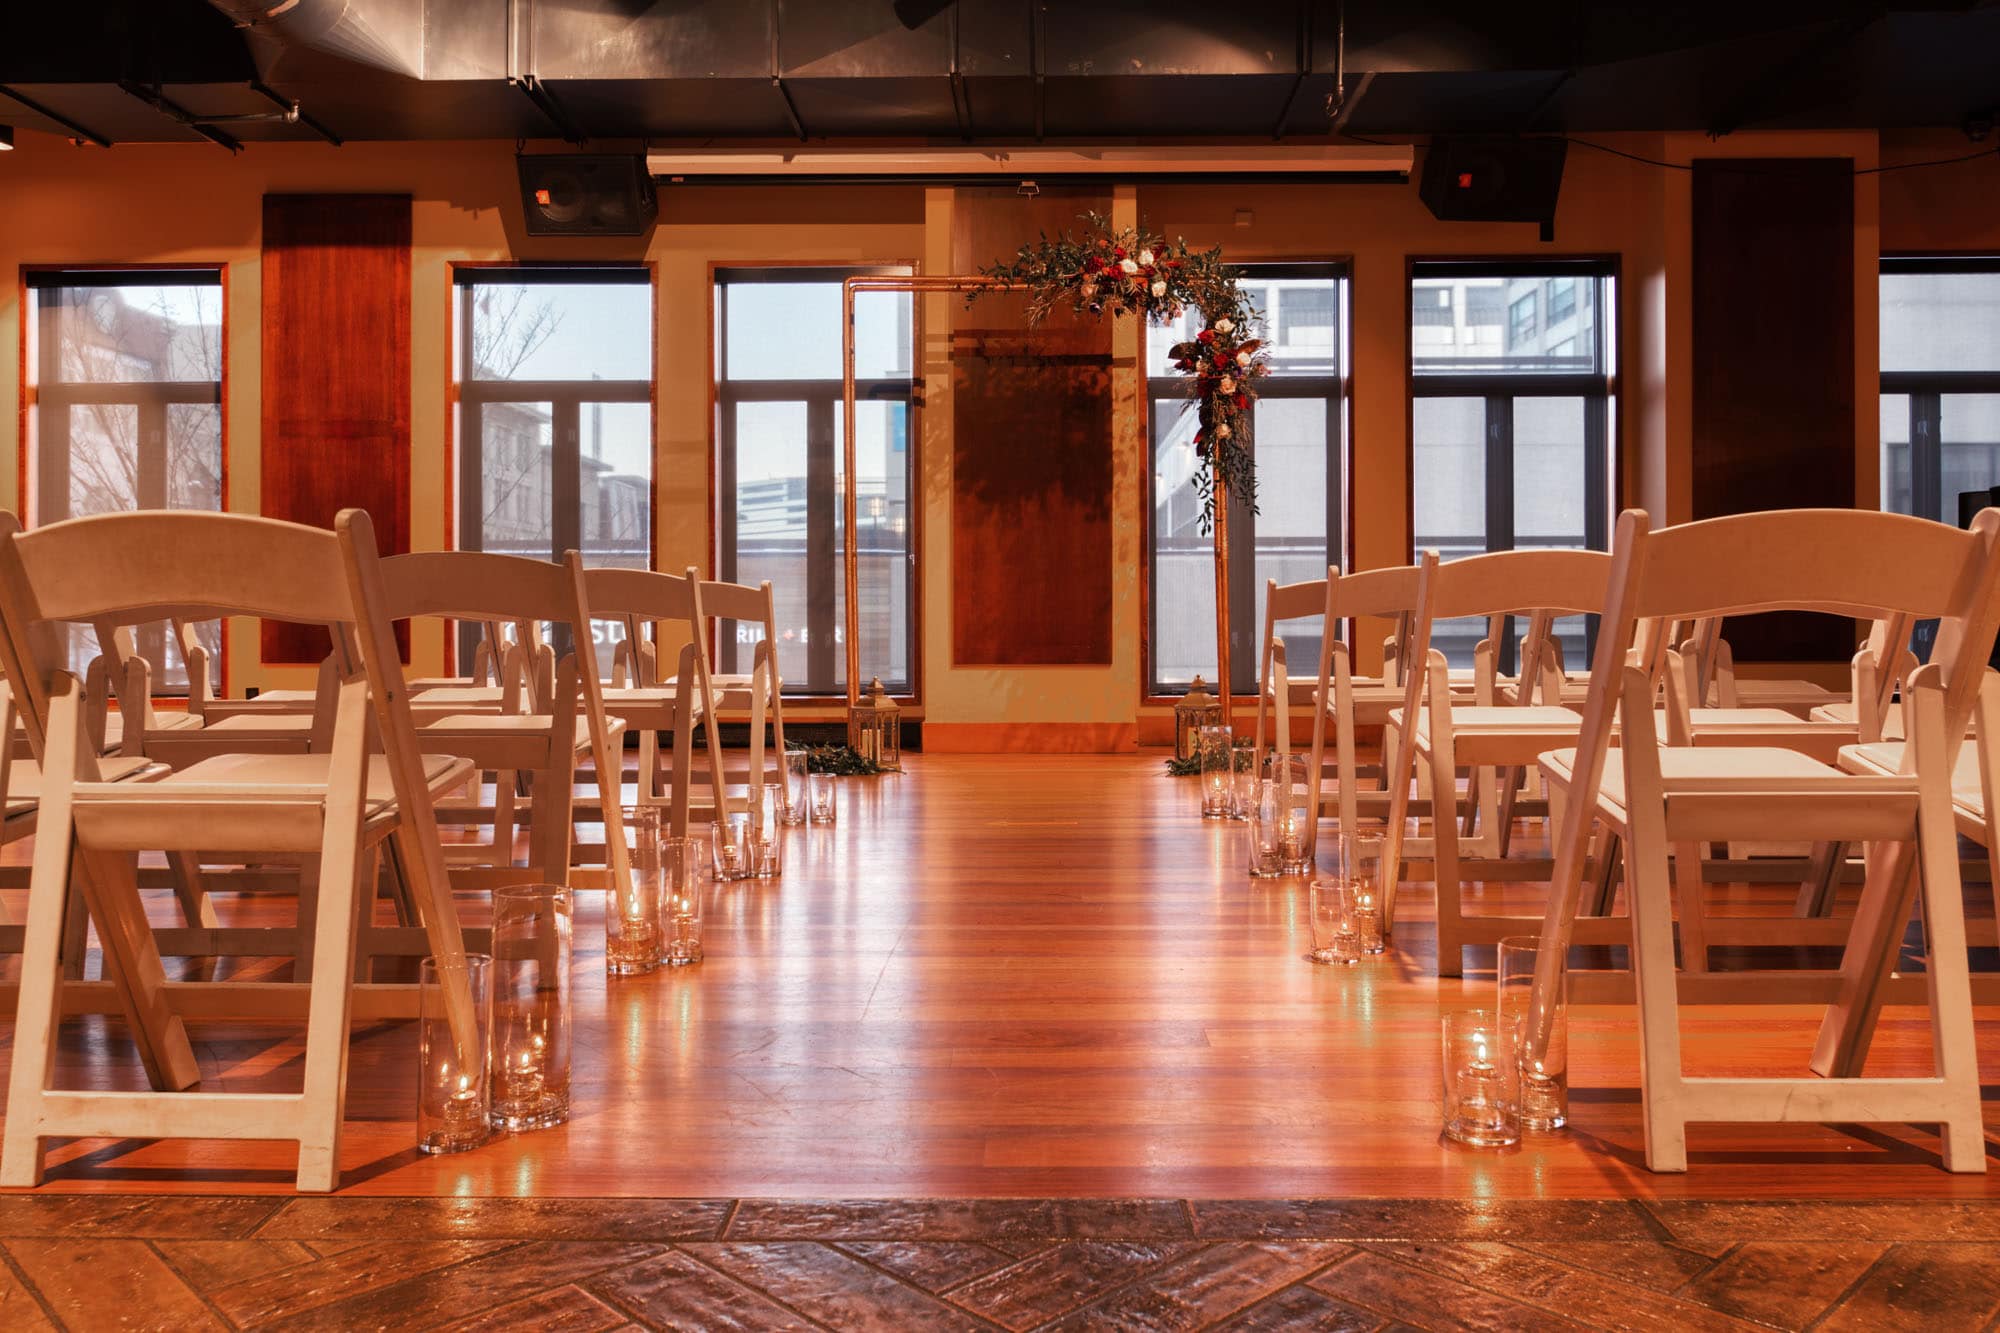 Saltlik's wedding event space setup with seating for guests, downtown Calgary visible through the windows at the end of the room behind the ceremony space.